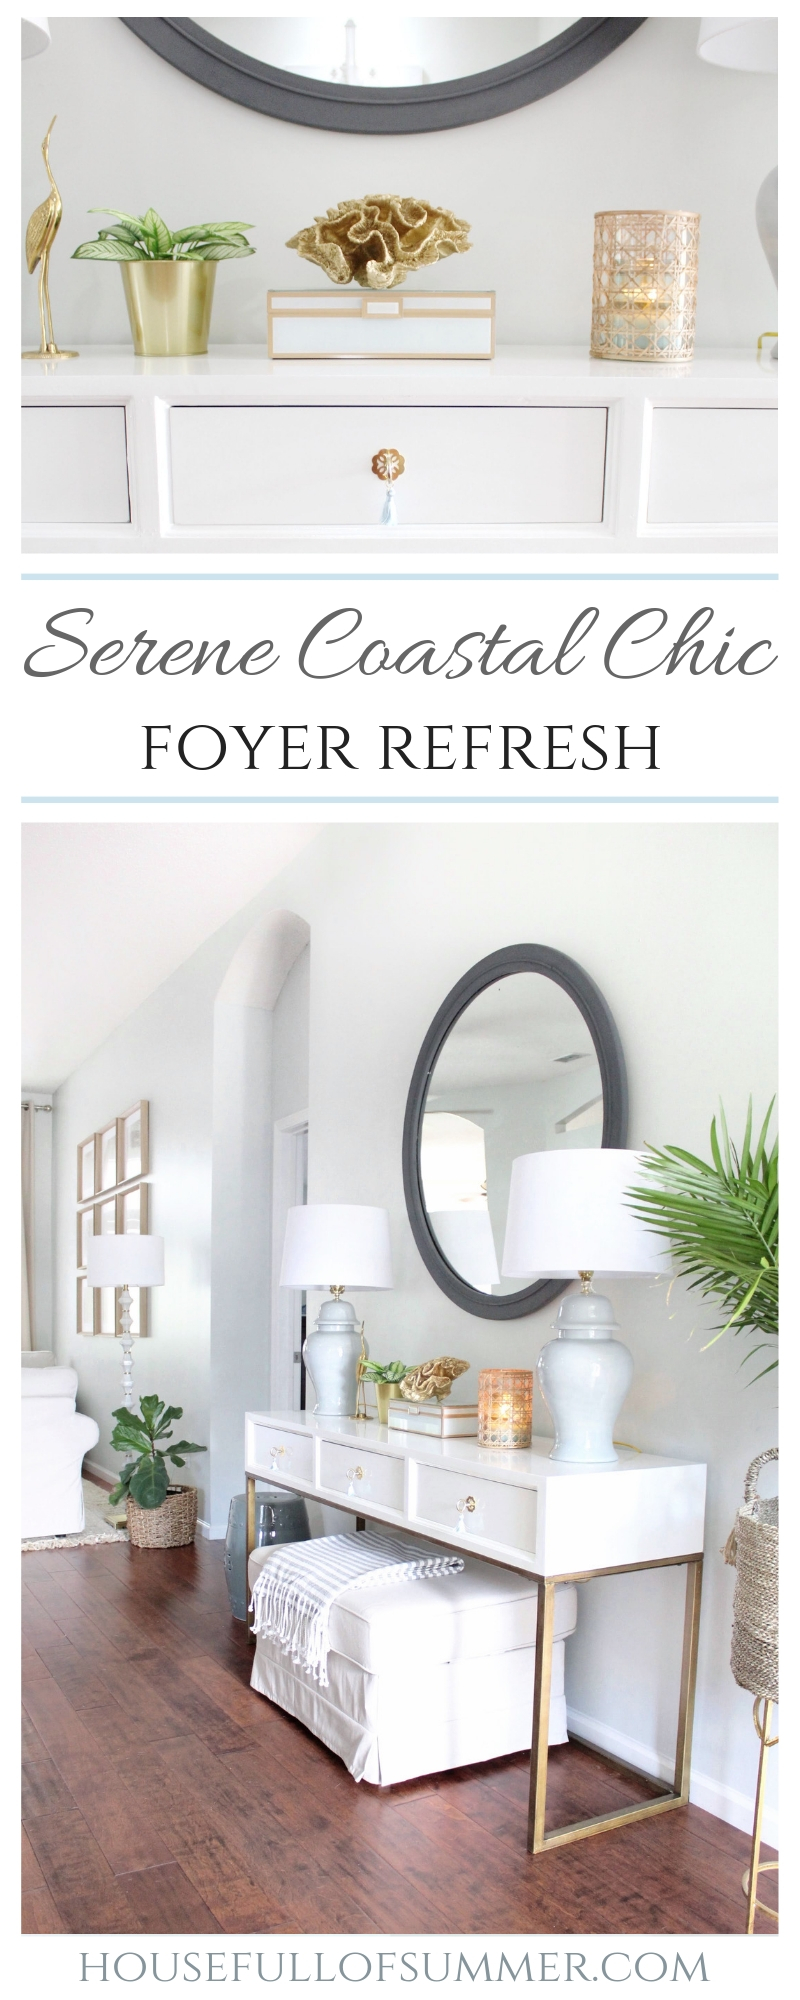 https://images.squarespace-cdn.com/content/v1/5939e31f3e00be788e6df8e7/1536443237781-10HLNJF17GFGQJA148IV/Serene+Coastal+Chic+Foyer+Refresh+%7C+House+Full+of+Summer+x+Lo+Home+-+Palm+Beach+chic+style%2C+ginger+jar+lamps%2C+round+mirror%2C+white+and+gold+console%2C+neutral+decor%2C+beach+house+style%2C+Florida+home+decor